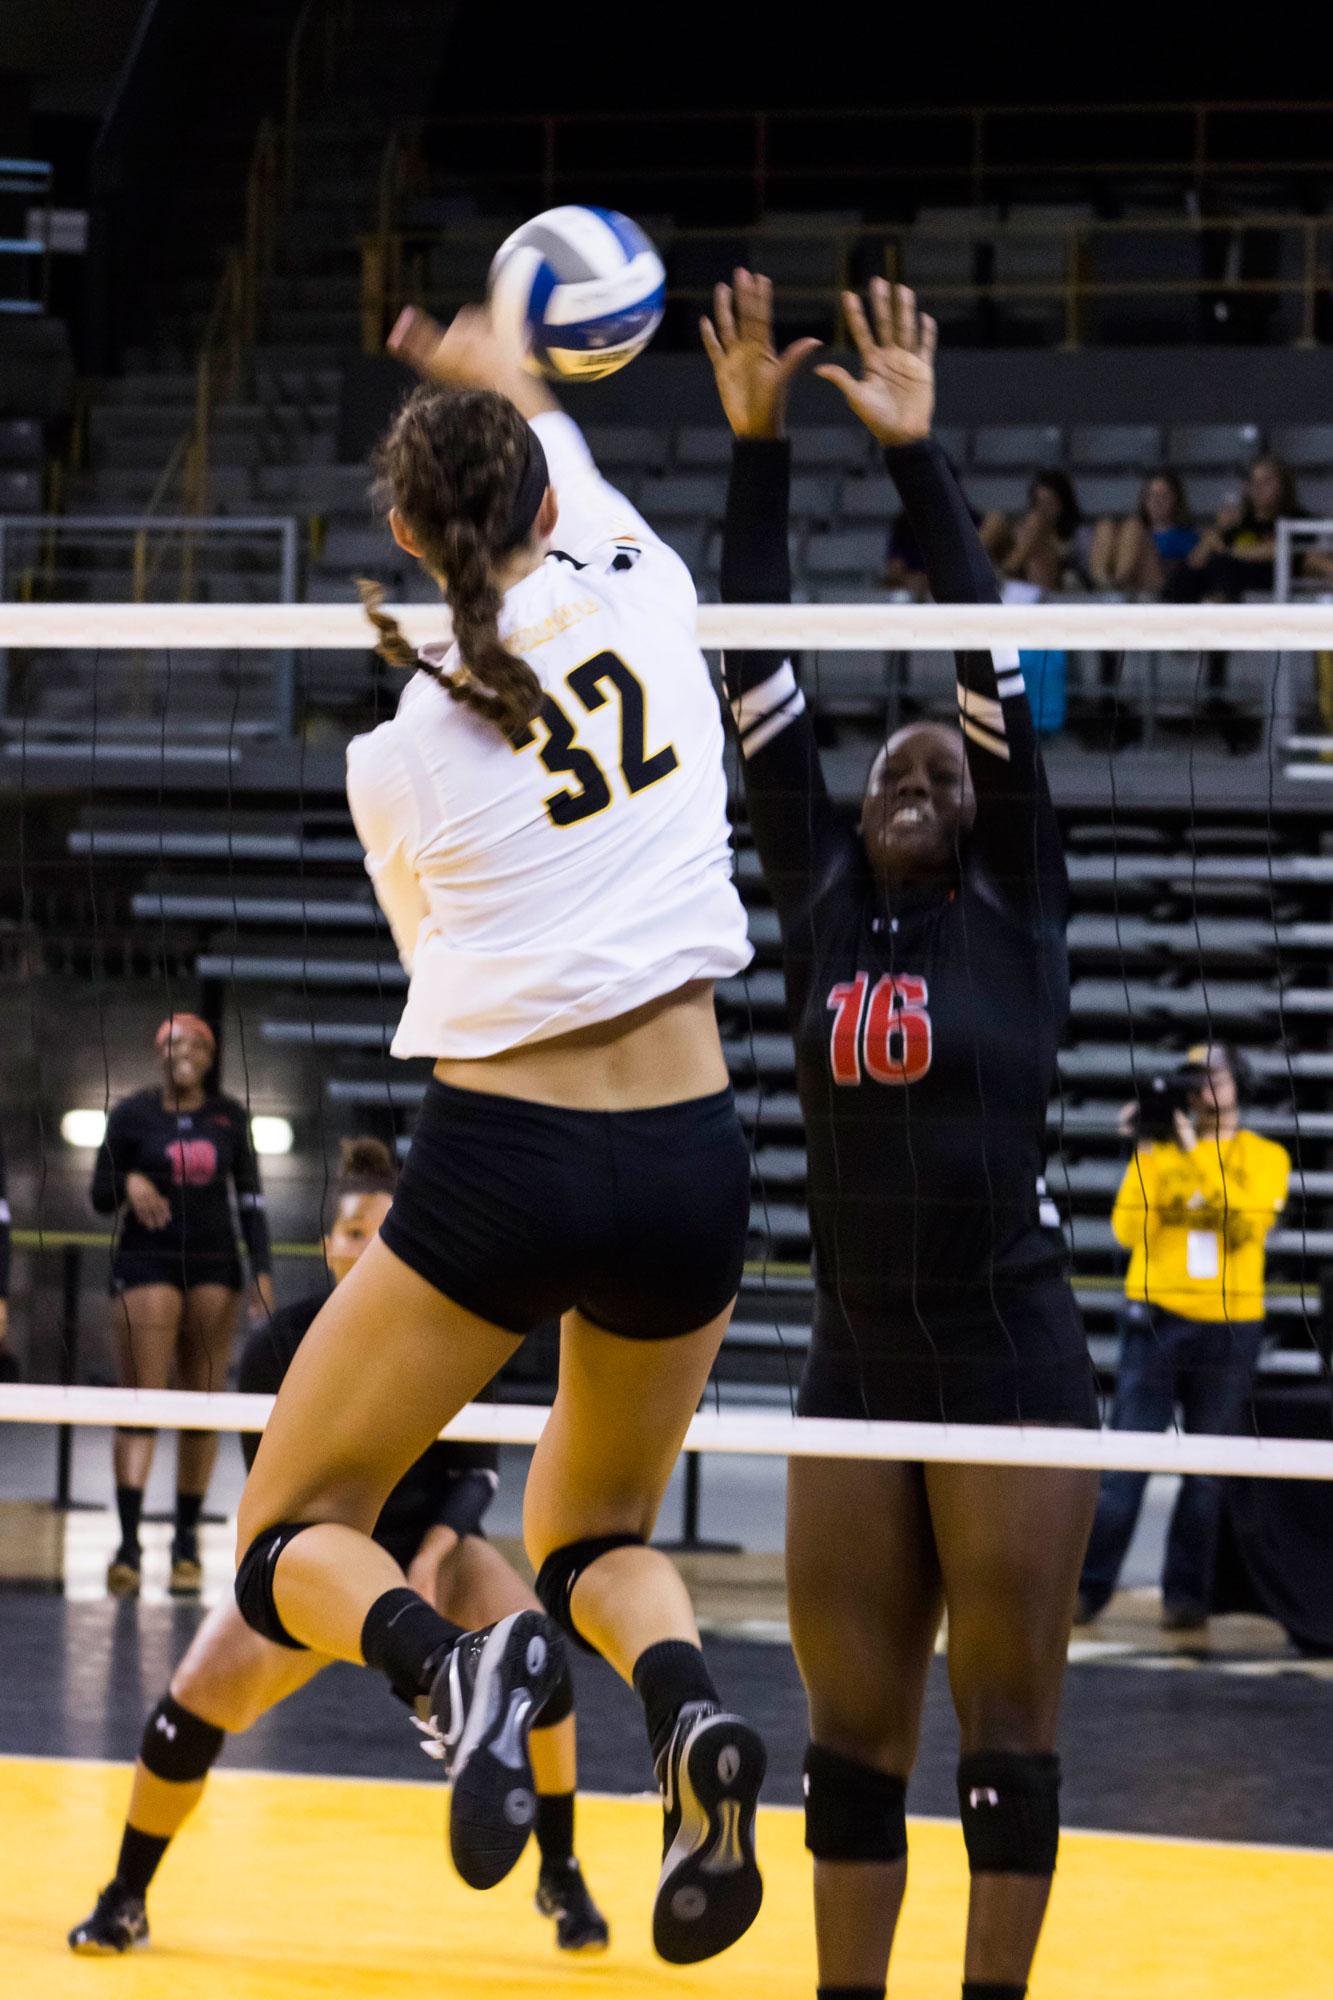 Senior+outside+hitter+Jess+Keller+spikes+the+ball+down+during+the+first+game+of+the+season+versus+Gardner-Webb+on+Tuesday+night.+App+State+secured+a+3-0+win+over+Gardner-Webb.+%7C+Photo%3A+Halle+Keighton